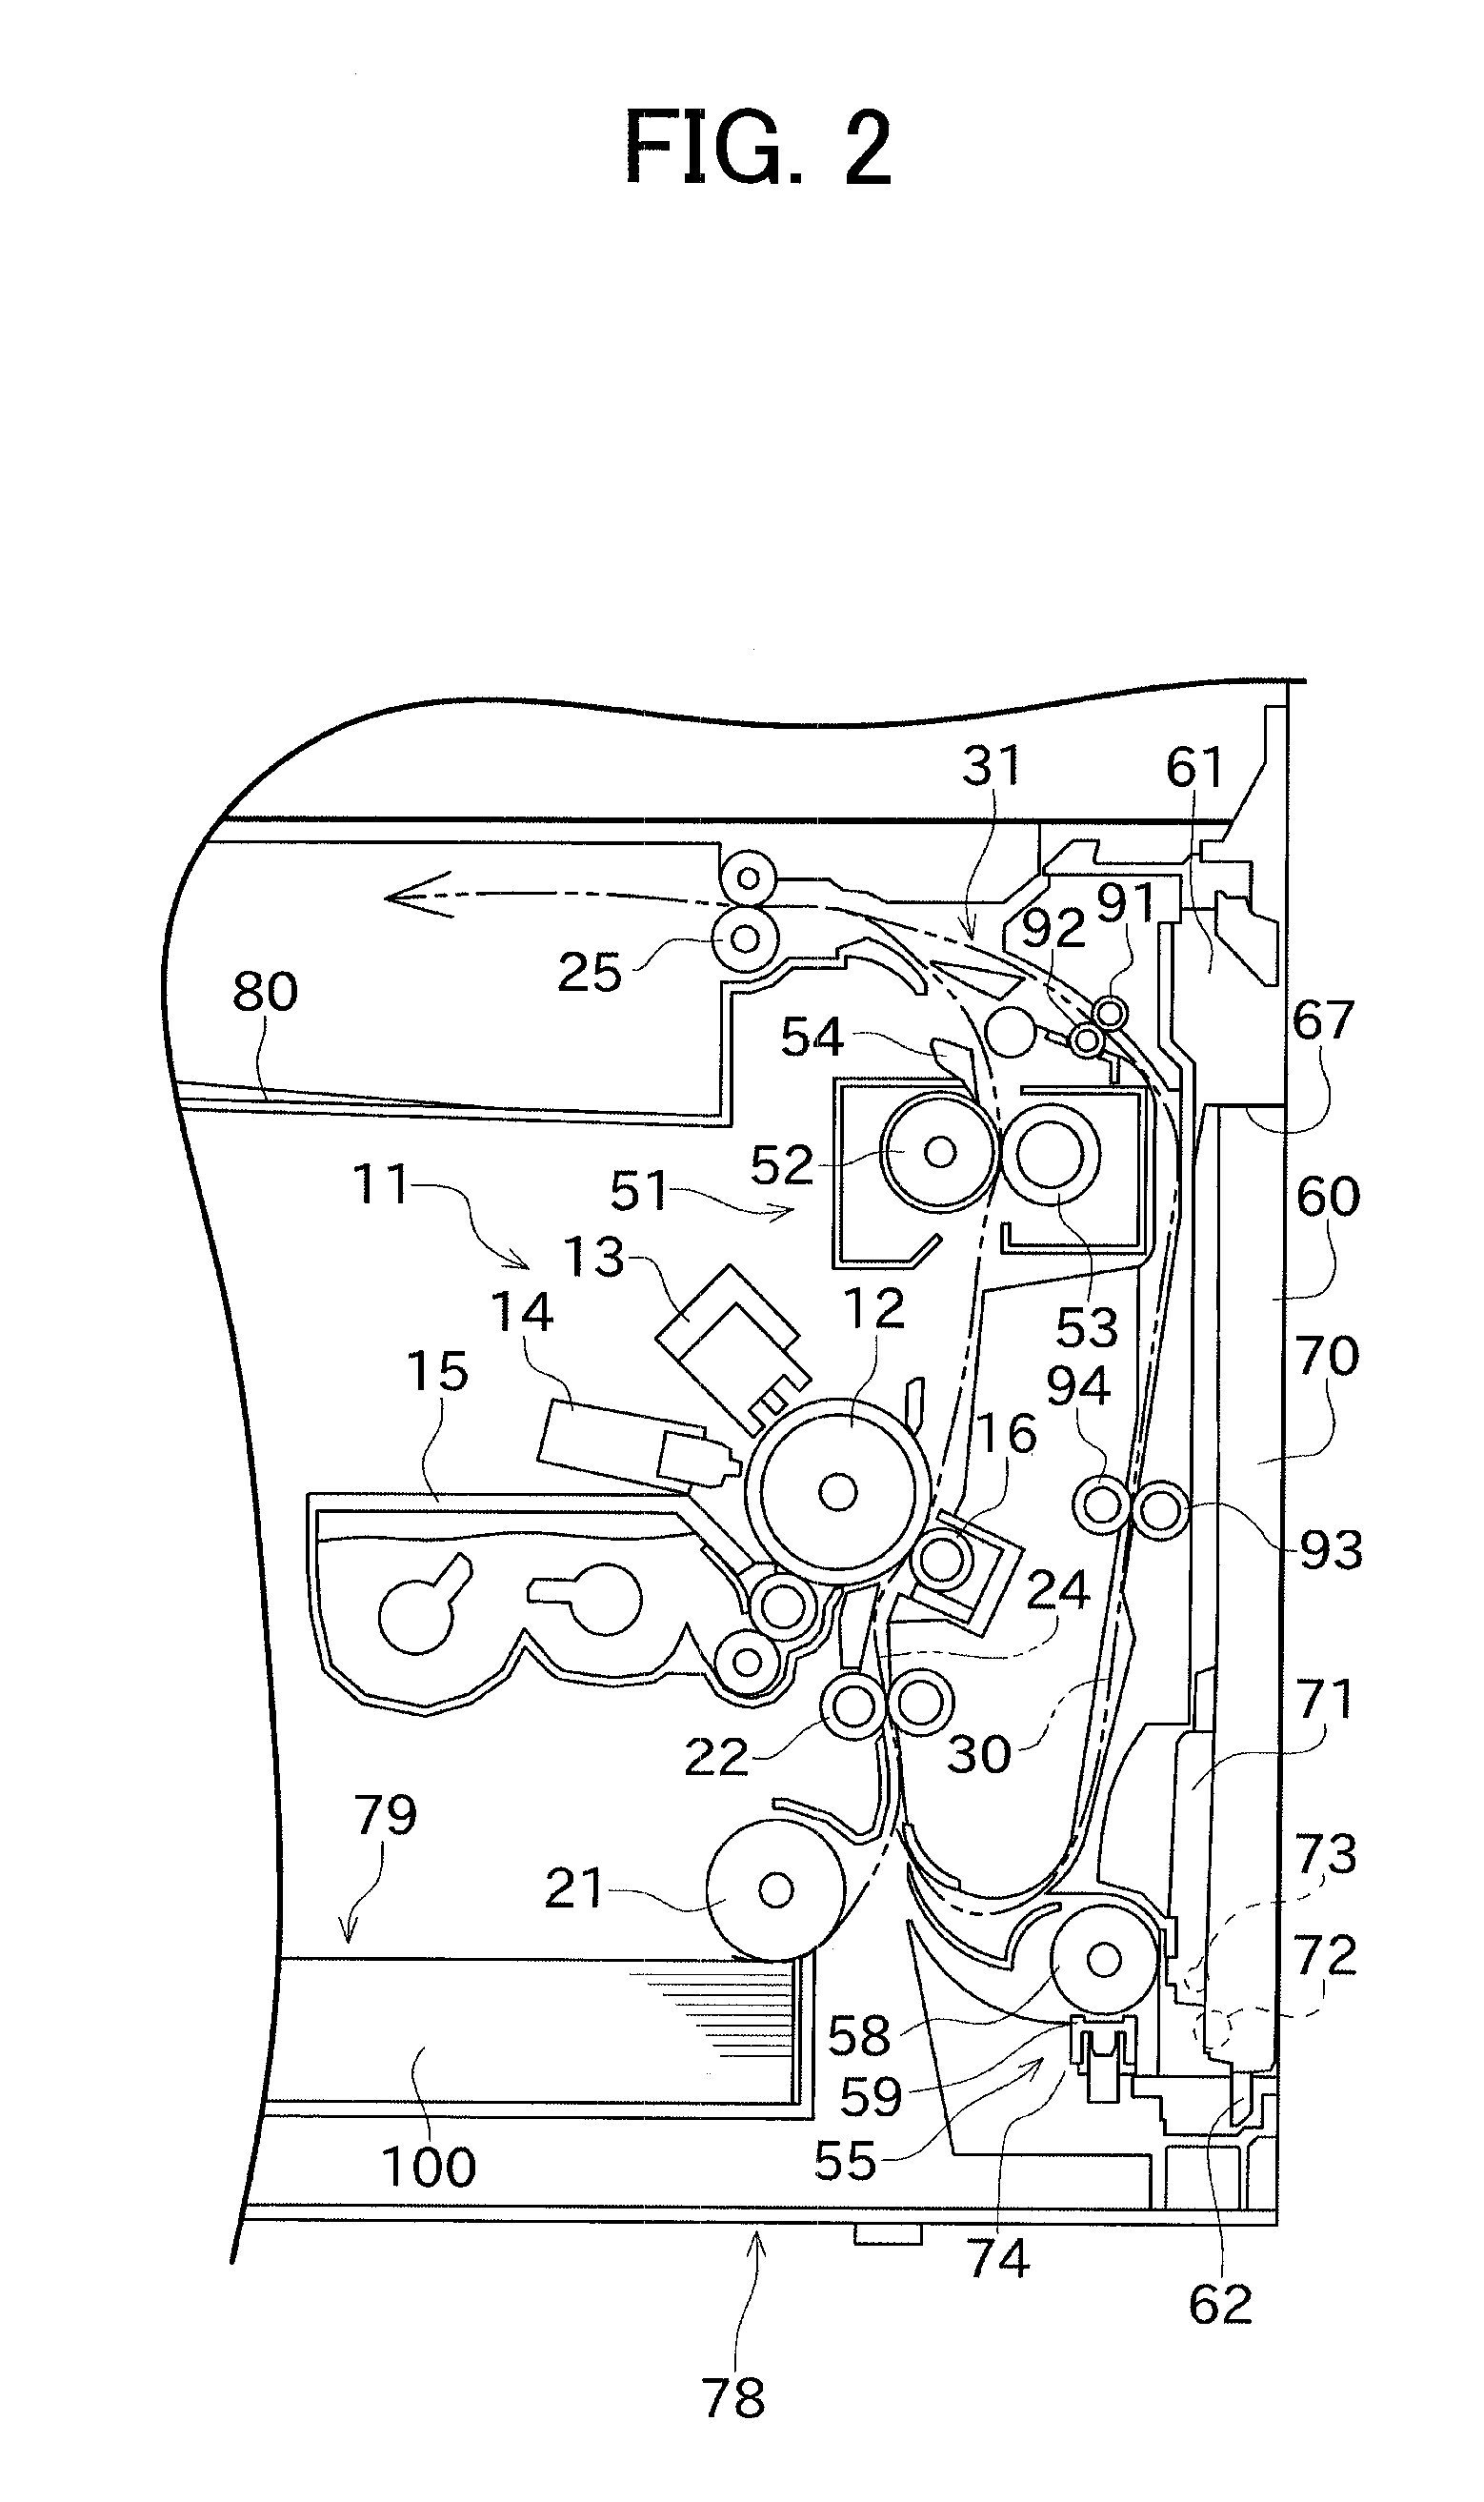 Image forming device with open/close cover and manual paper feeding tray